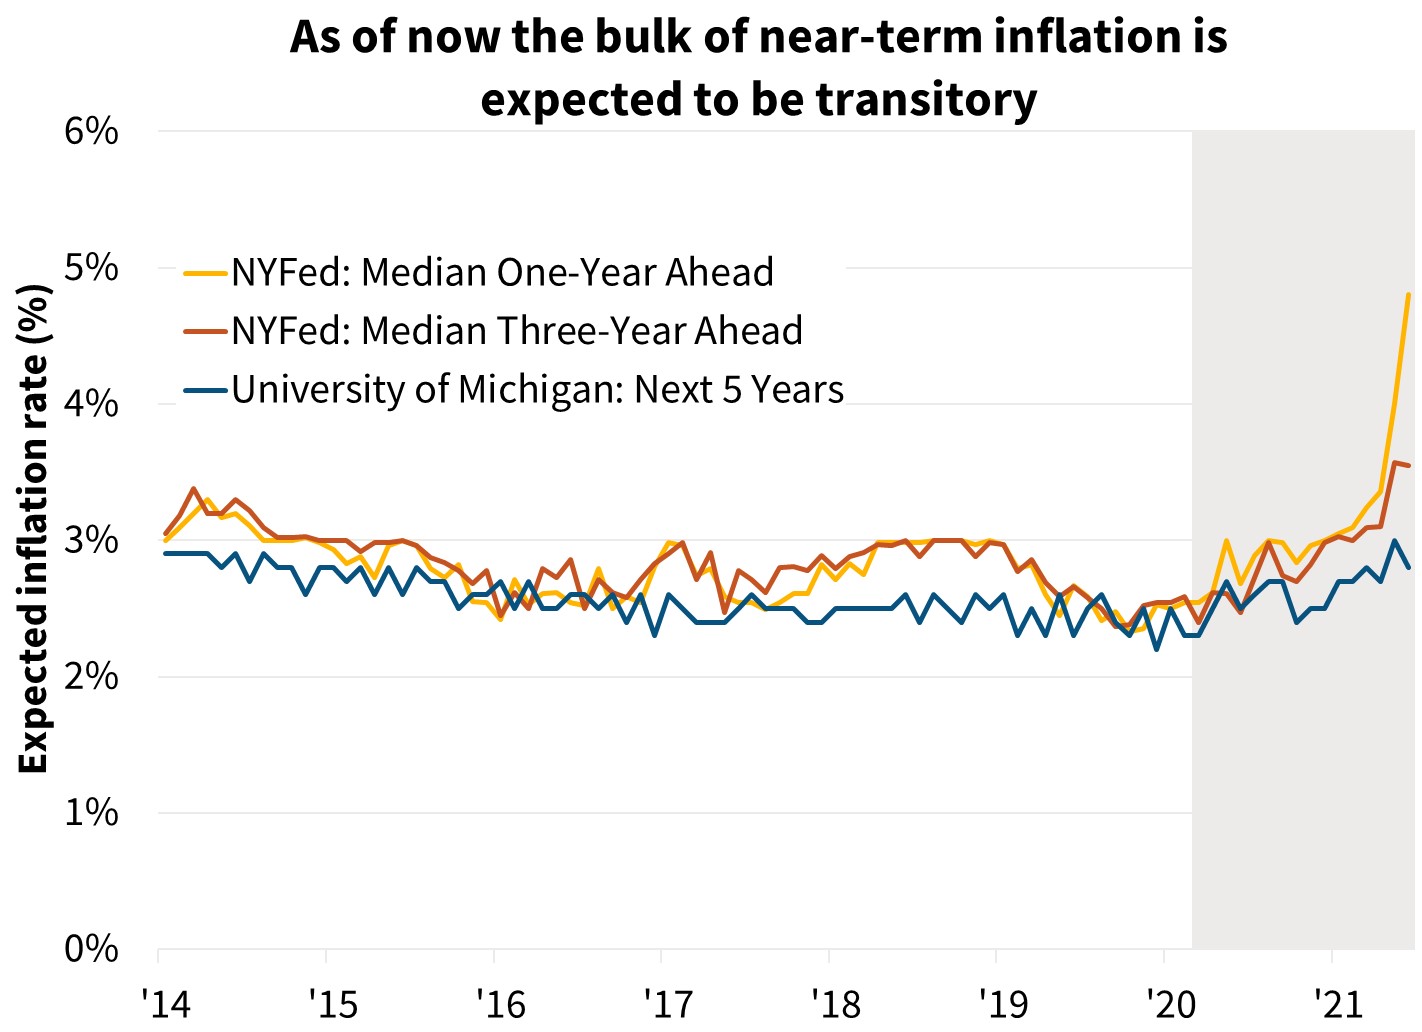  As of now the bulk of near-term inflation is expected to be transitory